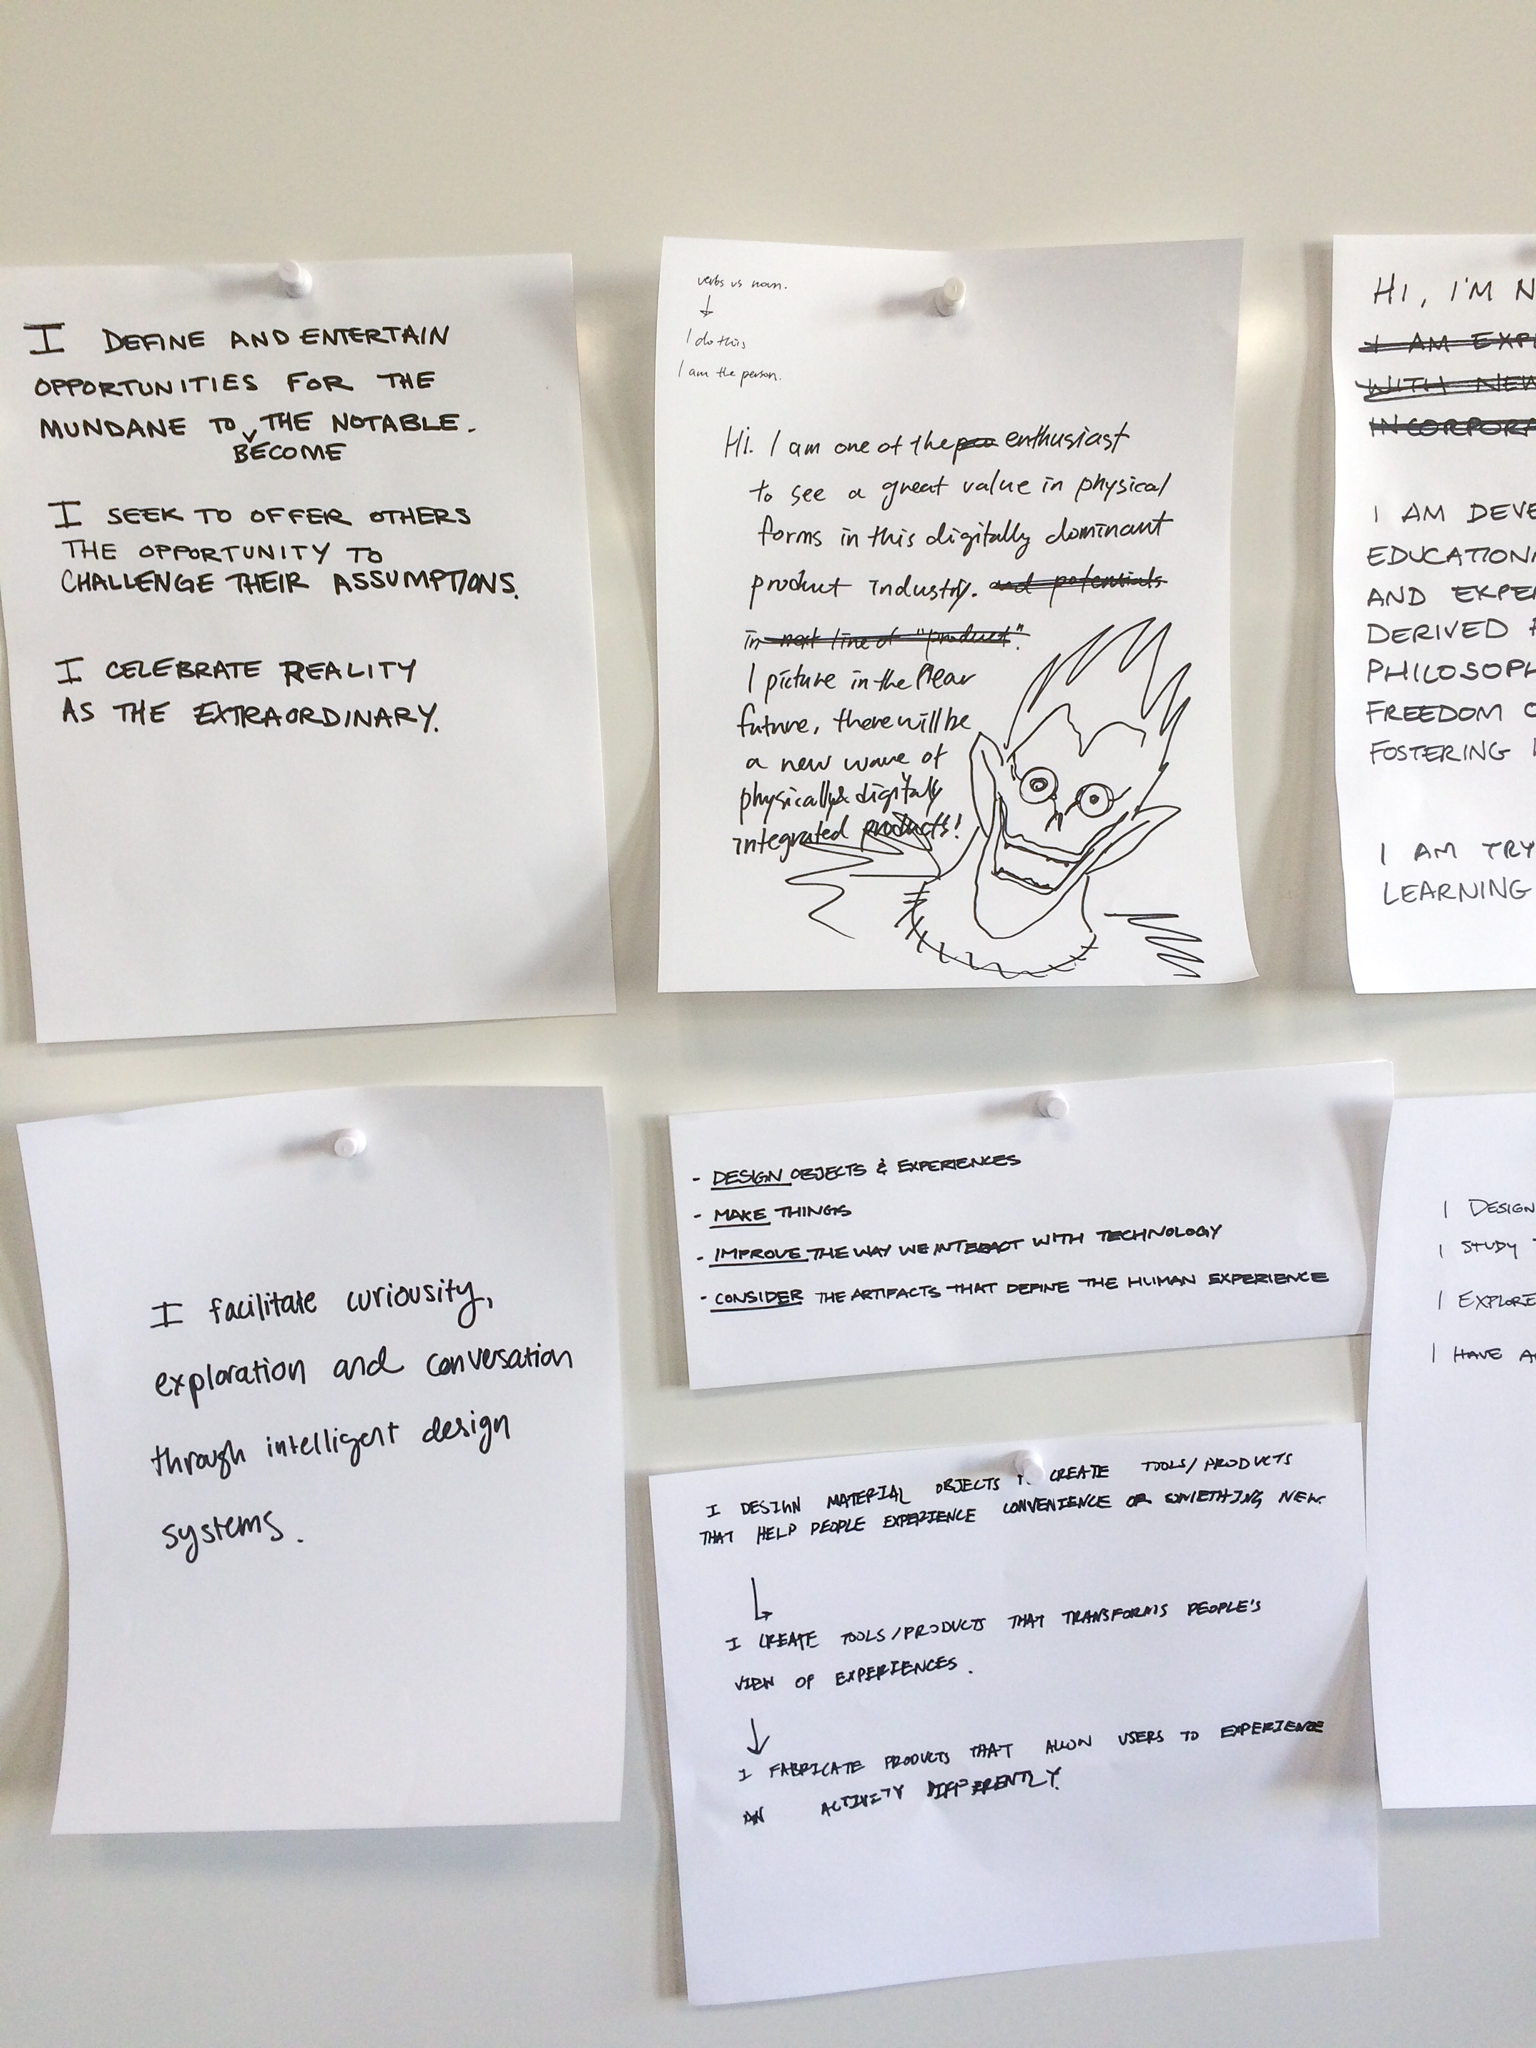 A selection of the students' self-descriptions of what they do